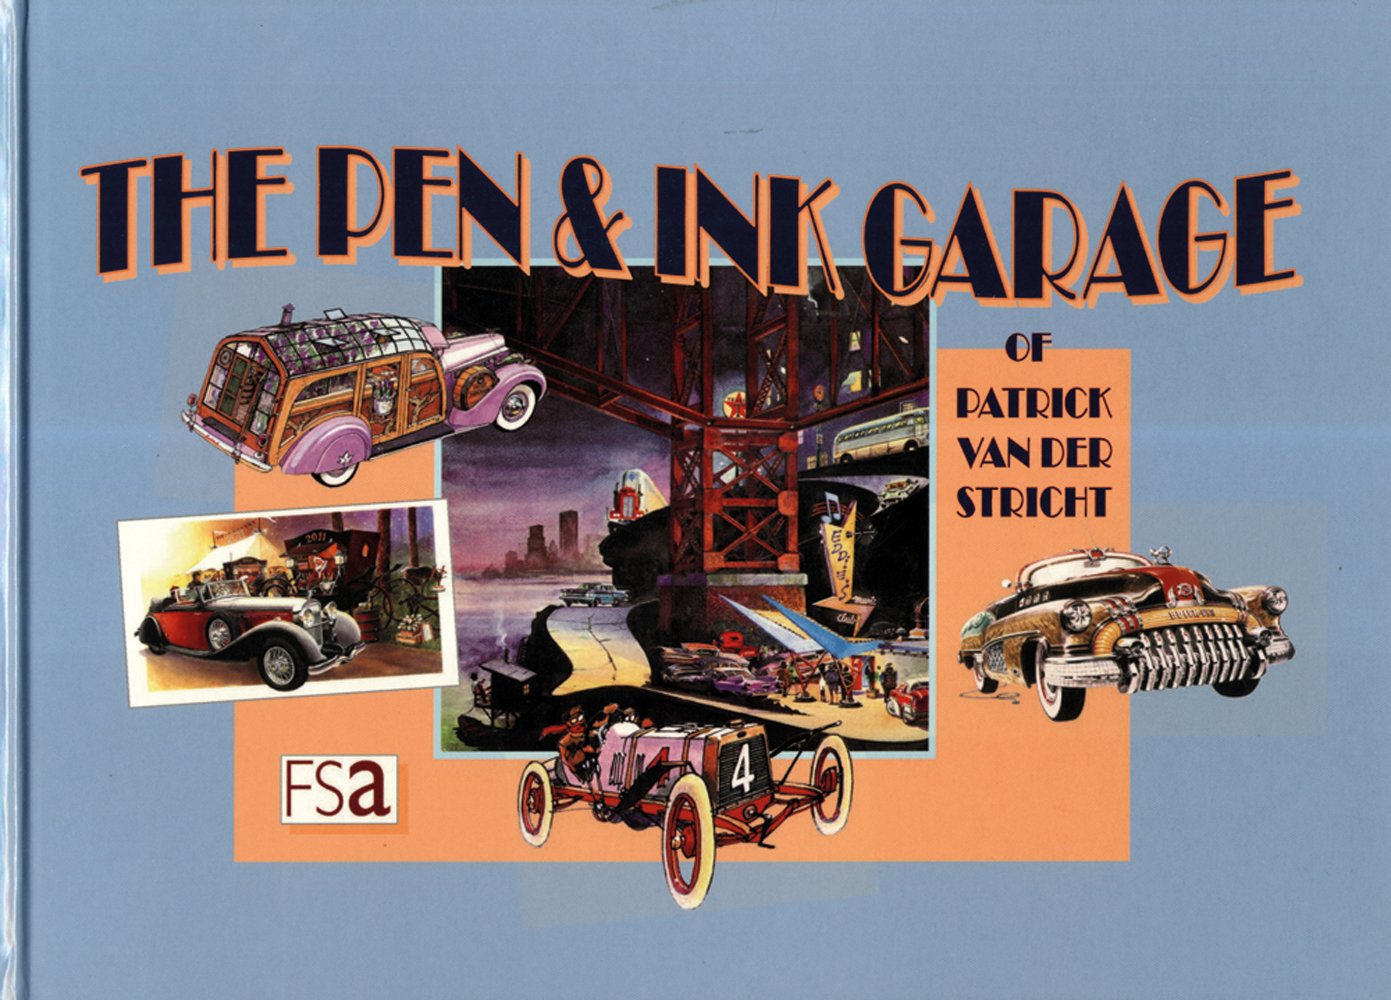 Montage of pen and ink illustrations of classic and vintage cars, THE PEN & INK GARAGE in black font with orange drop shadow, to top.